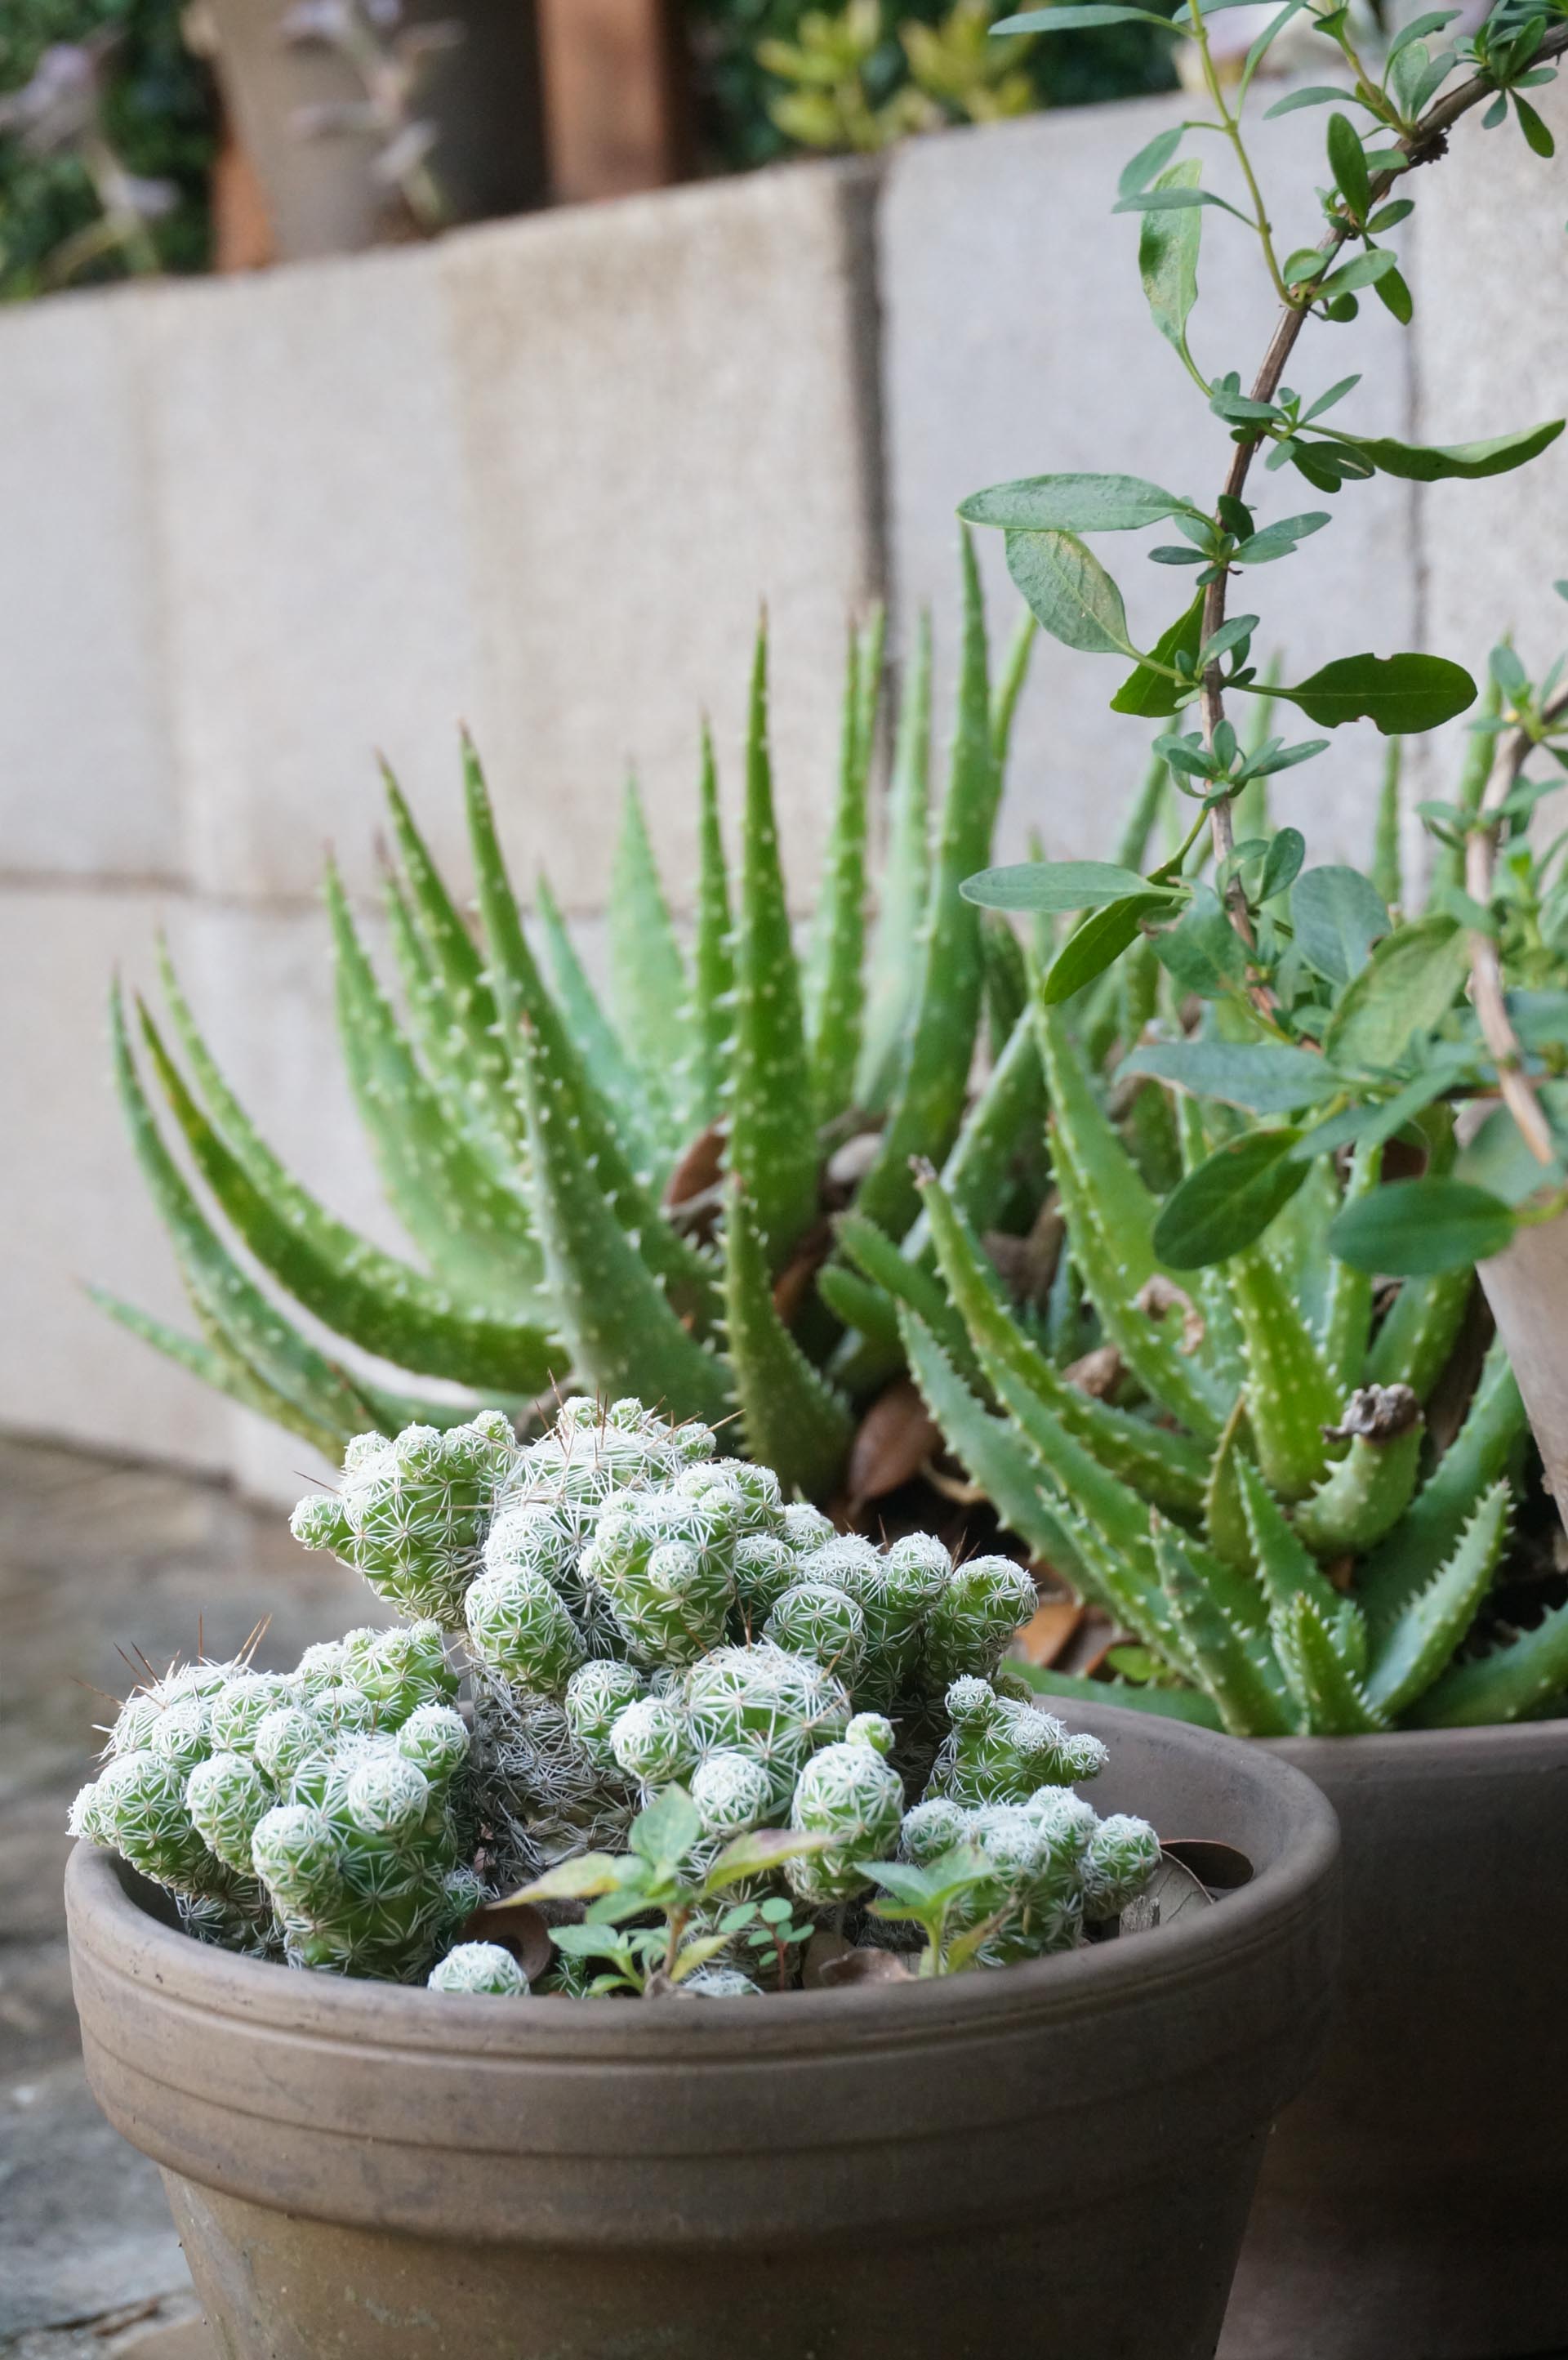 Potted-plants-add-instant-style